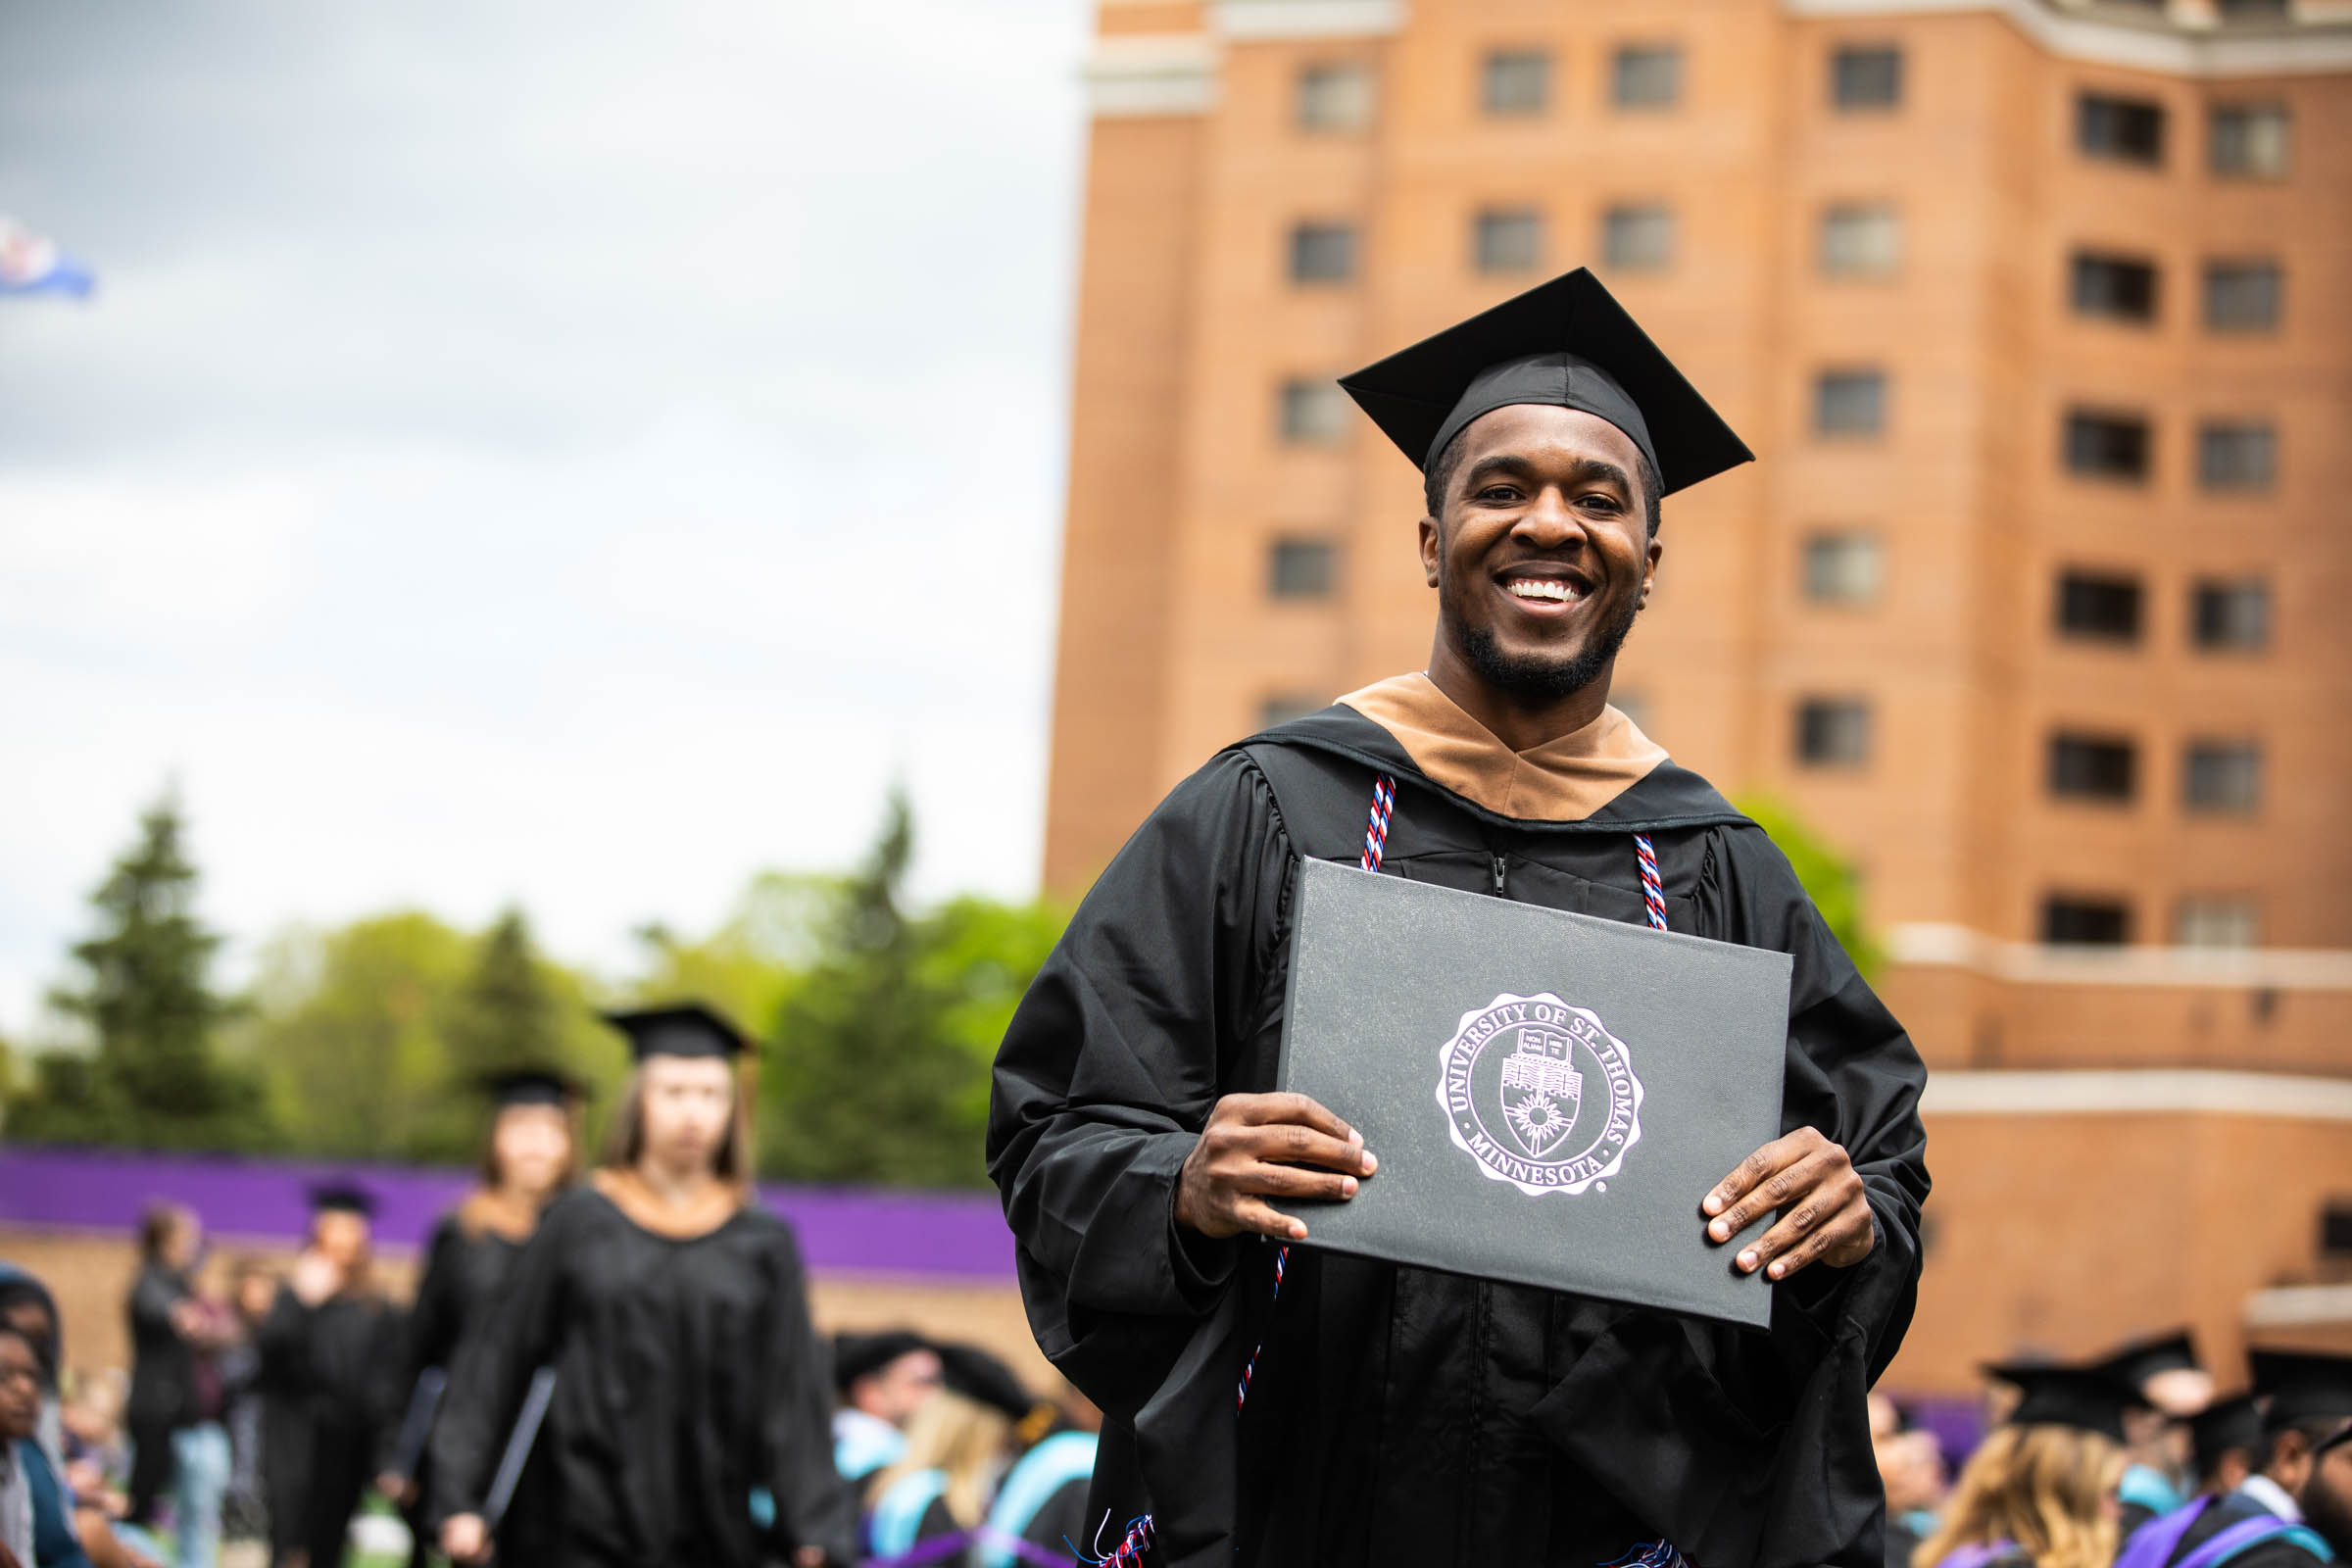 Graduate Gary Cooper shows off his diploma cover during the 2022 Graduate Commencement ceremony for the Opus College of Business, the School of Education and the School of Divinity in St. Paul on May 22, 2022.